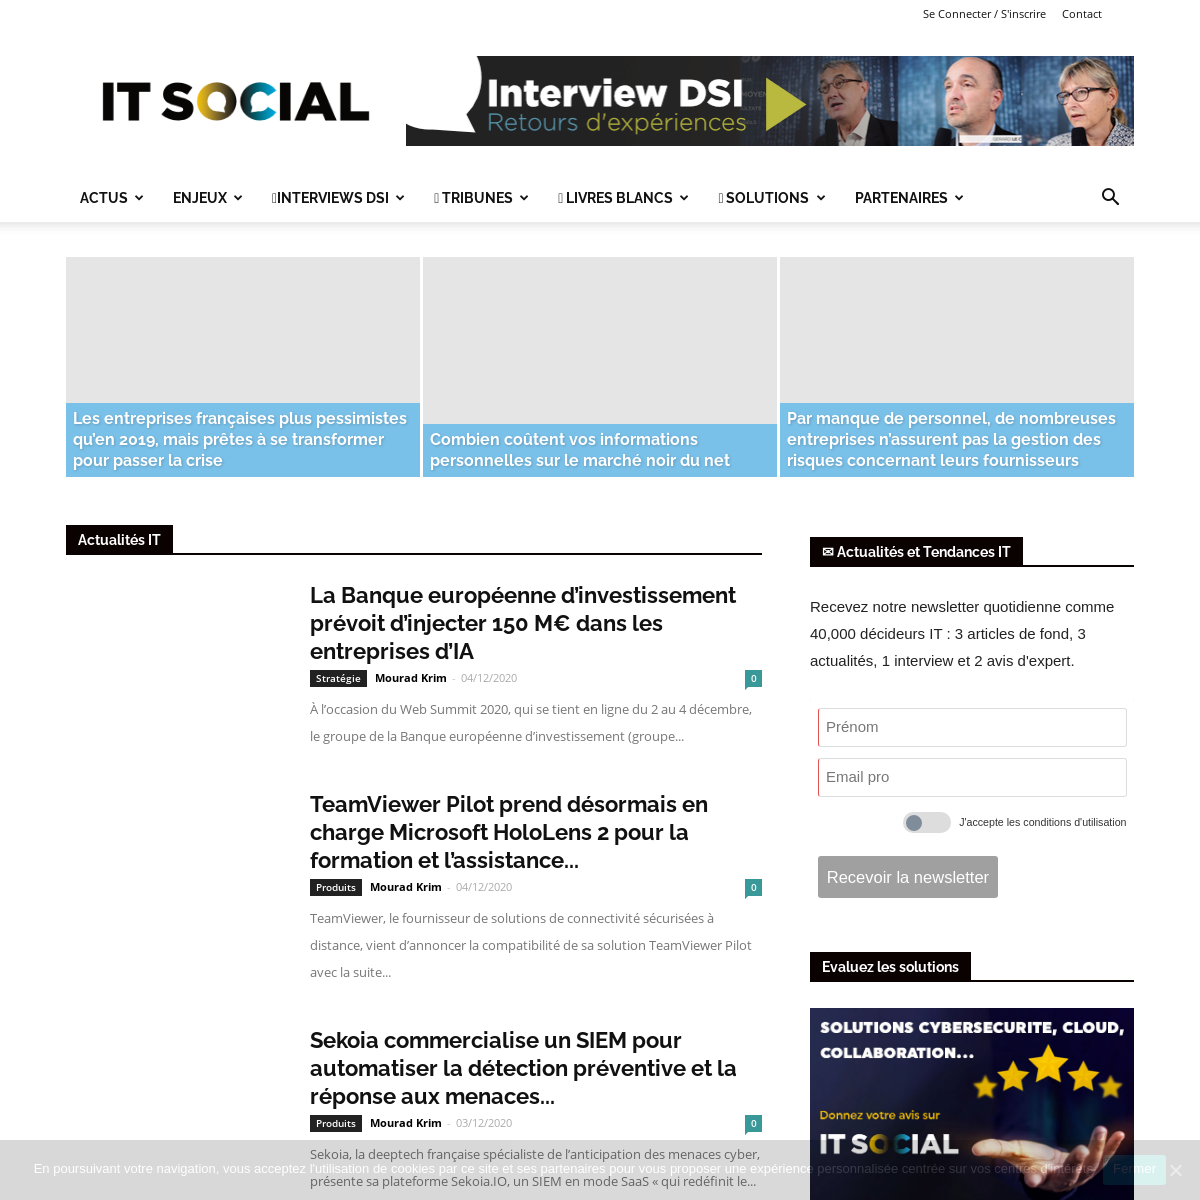 A complete backup of itsocial.fr